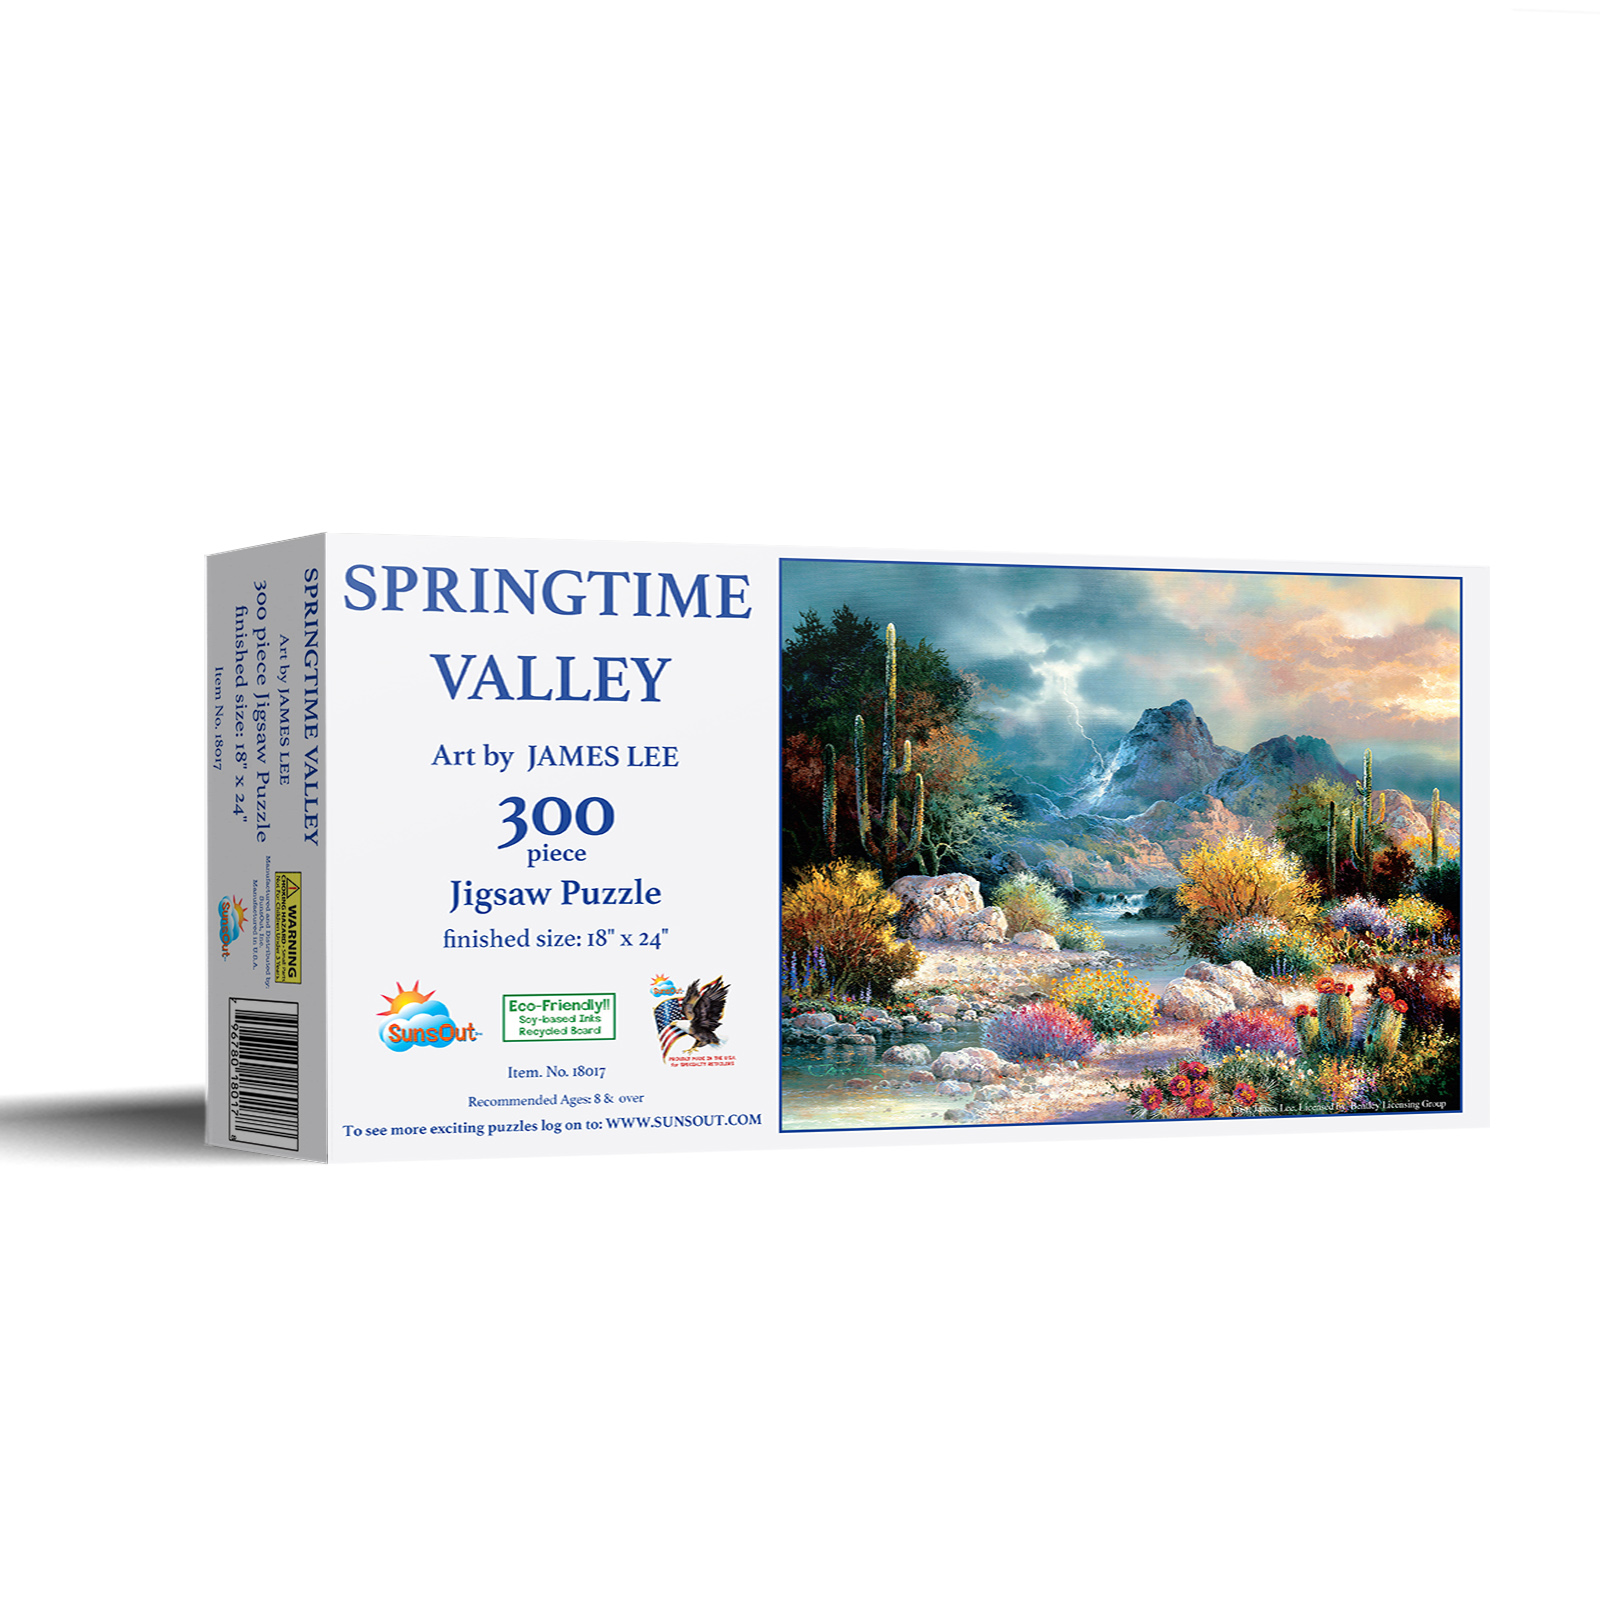 SUNSOUT INC - Springtime Valley - 300 pc Jigsaw Puzzle by Artist: James Lee - Finished Size 18" x 24" - MPN# 18017 - image 2 of 5